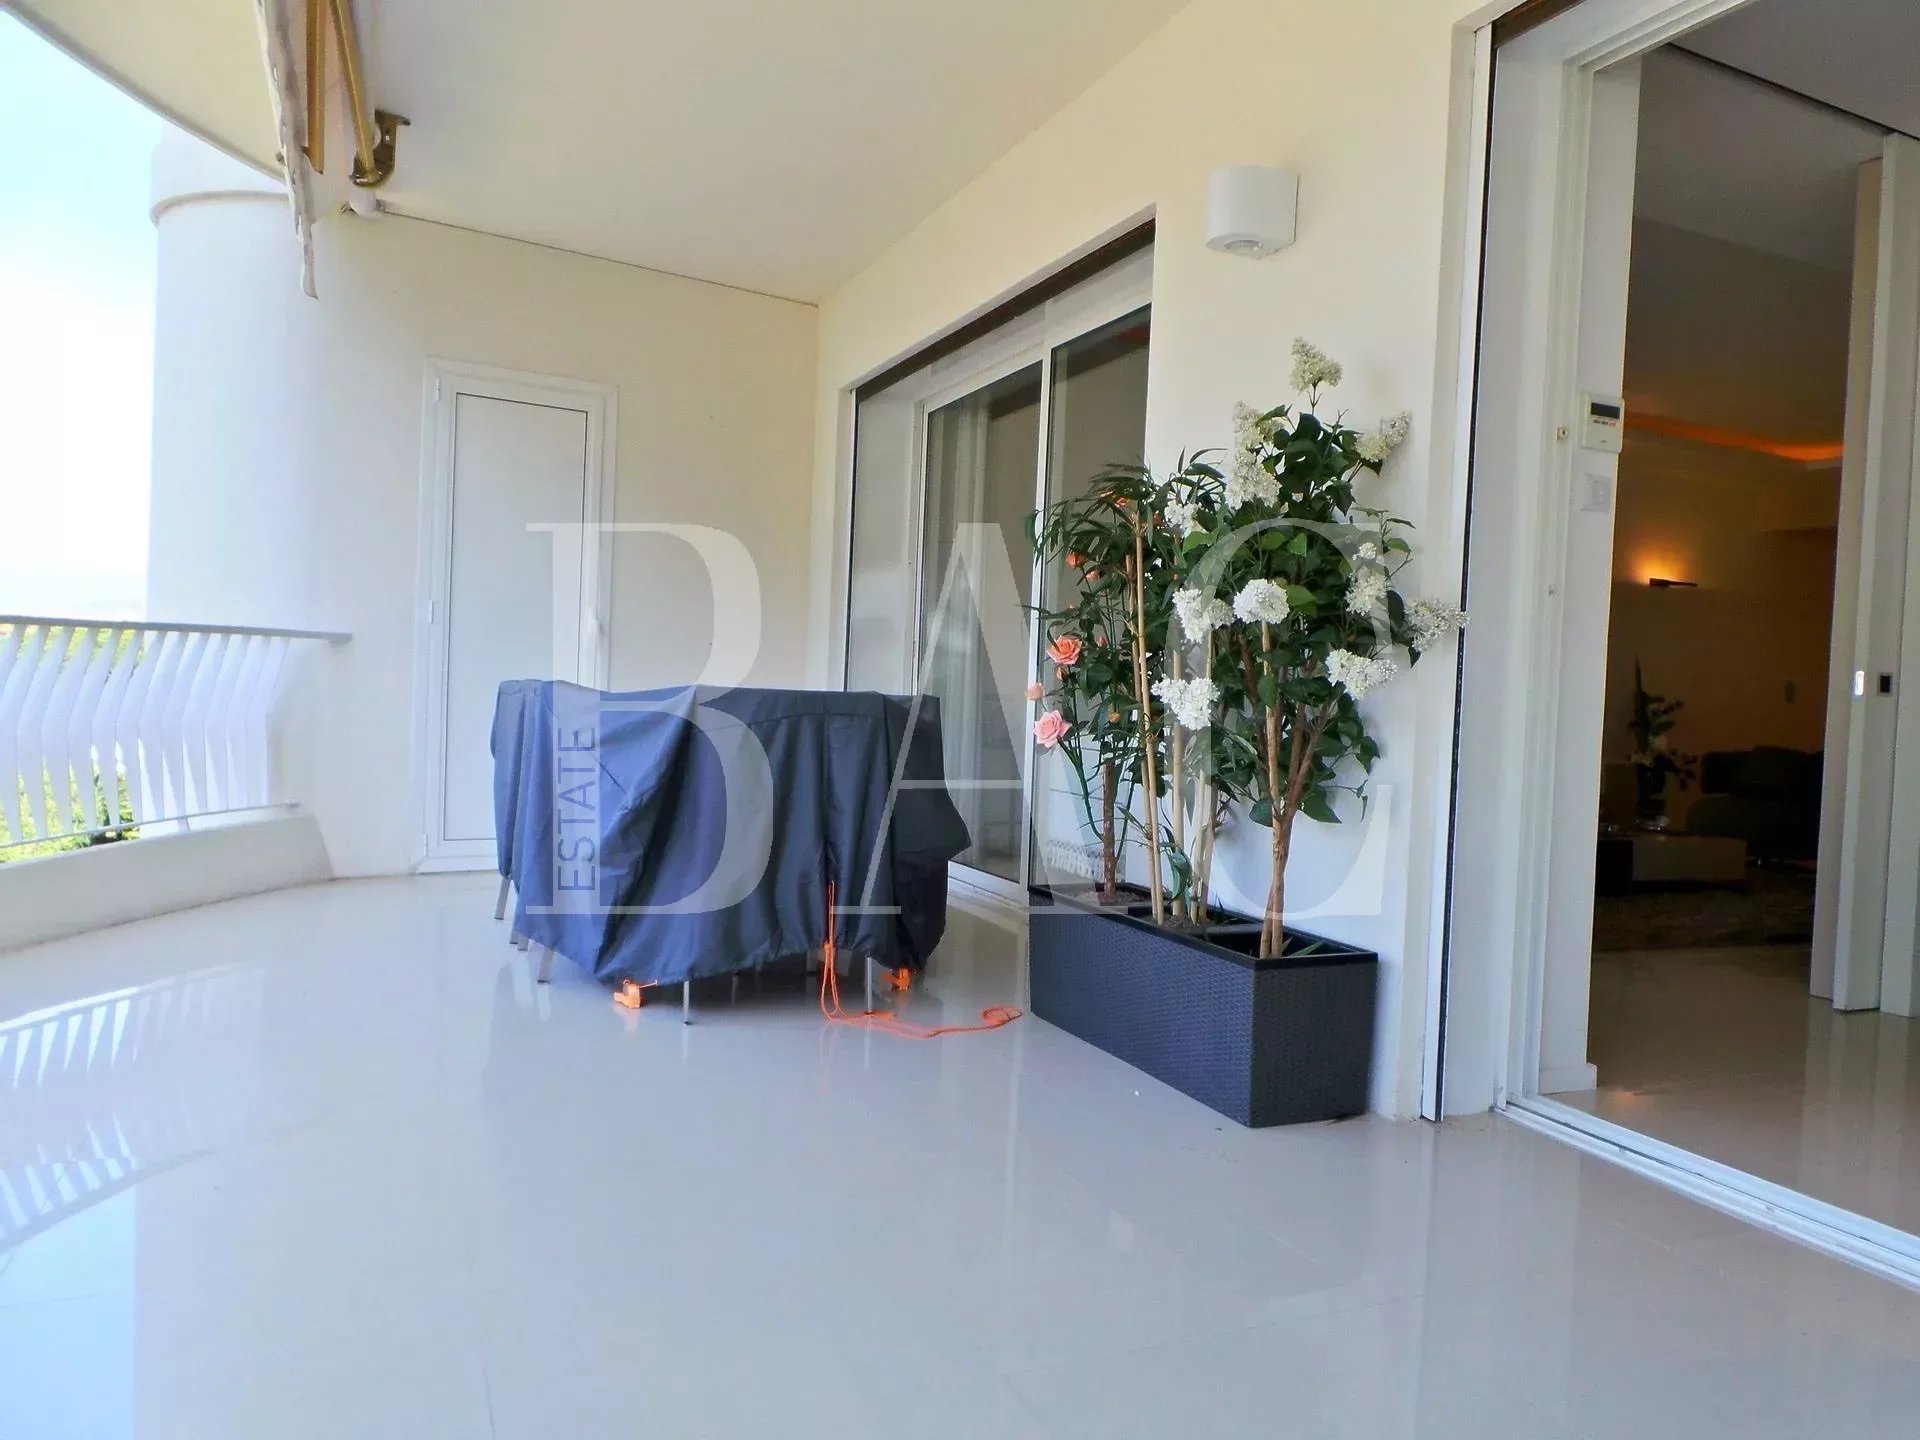 Cannes, Boulevard de la Croisette in a sought after residence and only 1700 meters from the Palais du festival des films